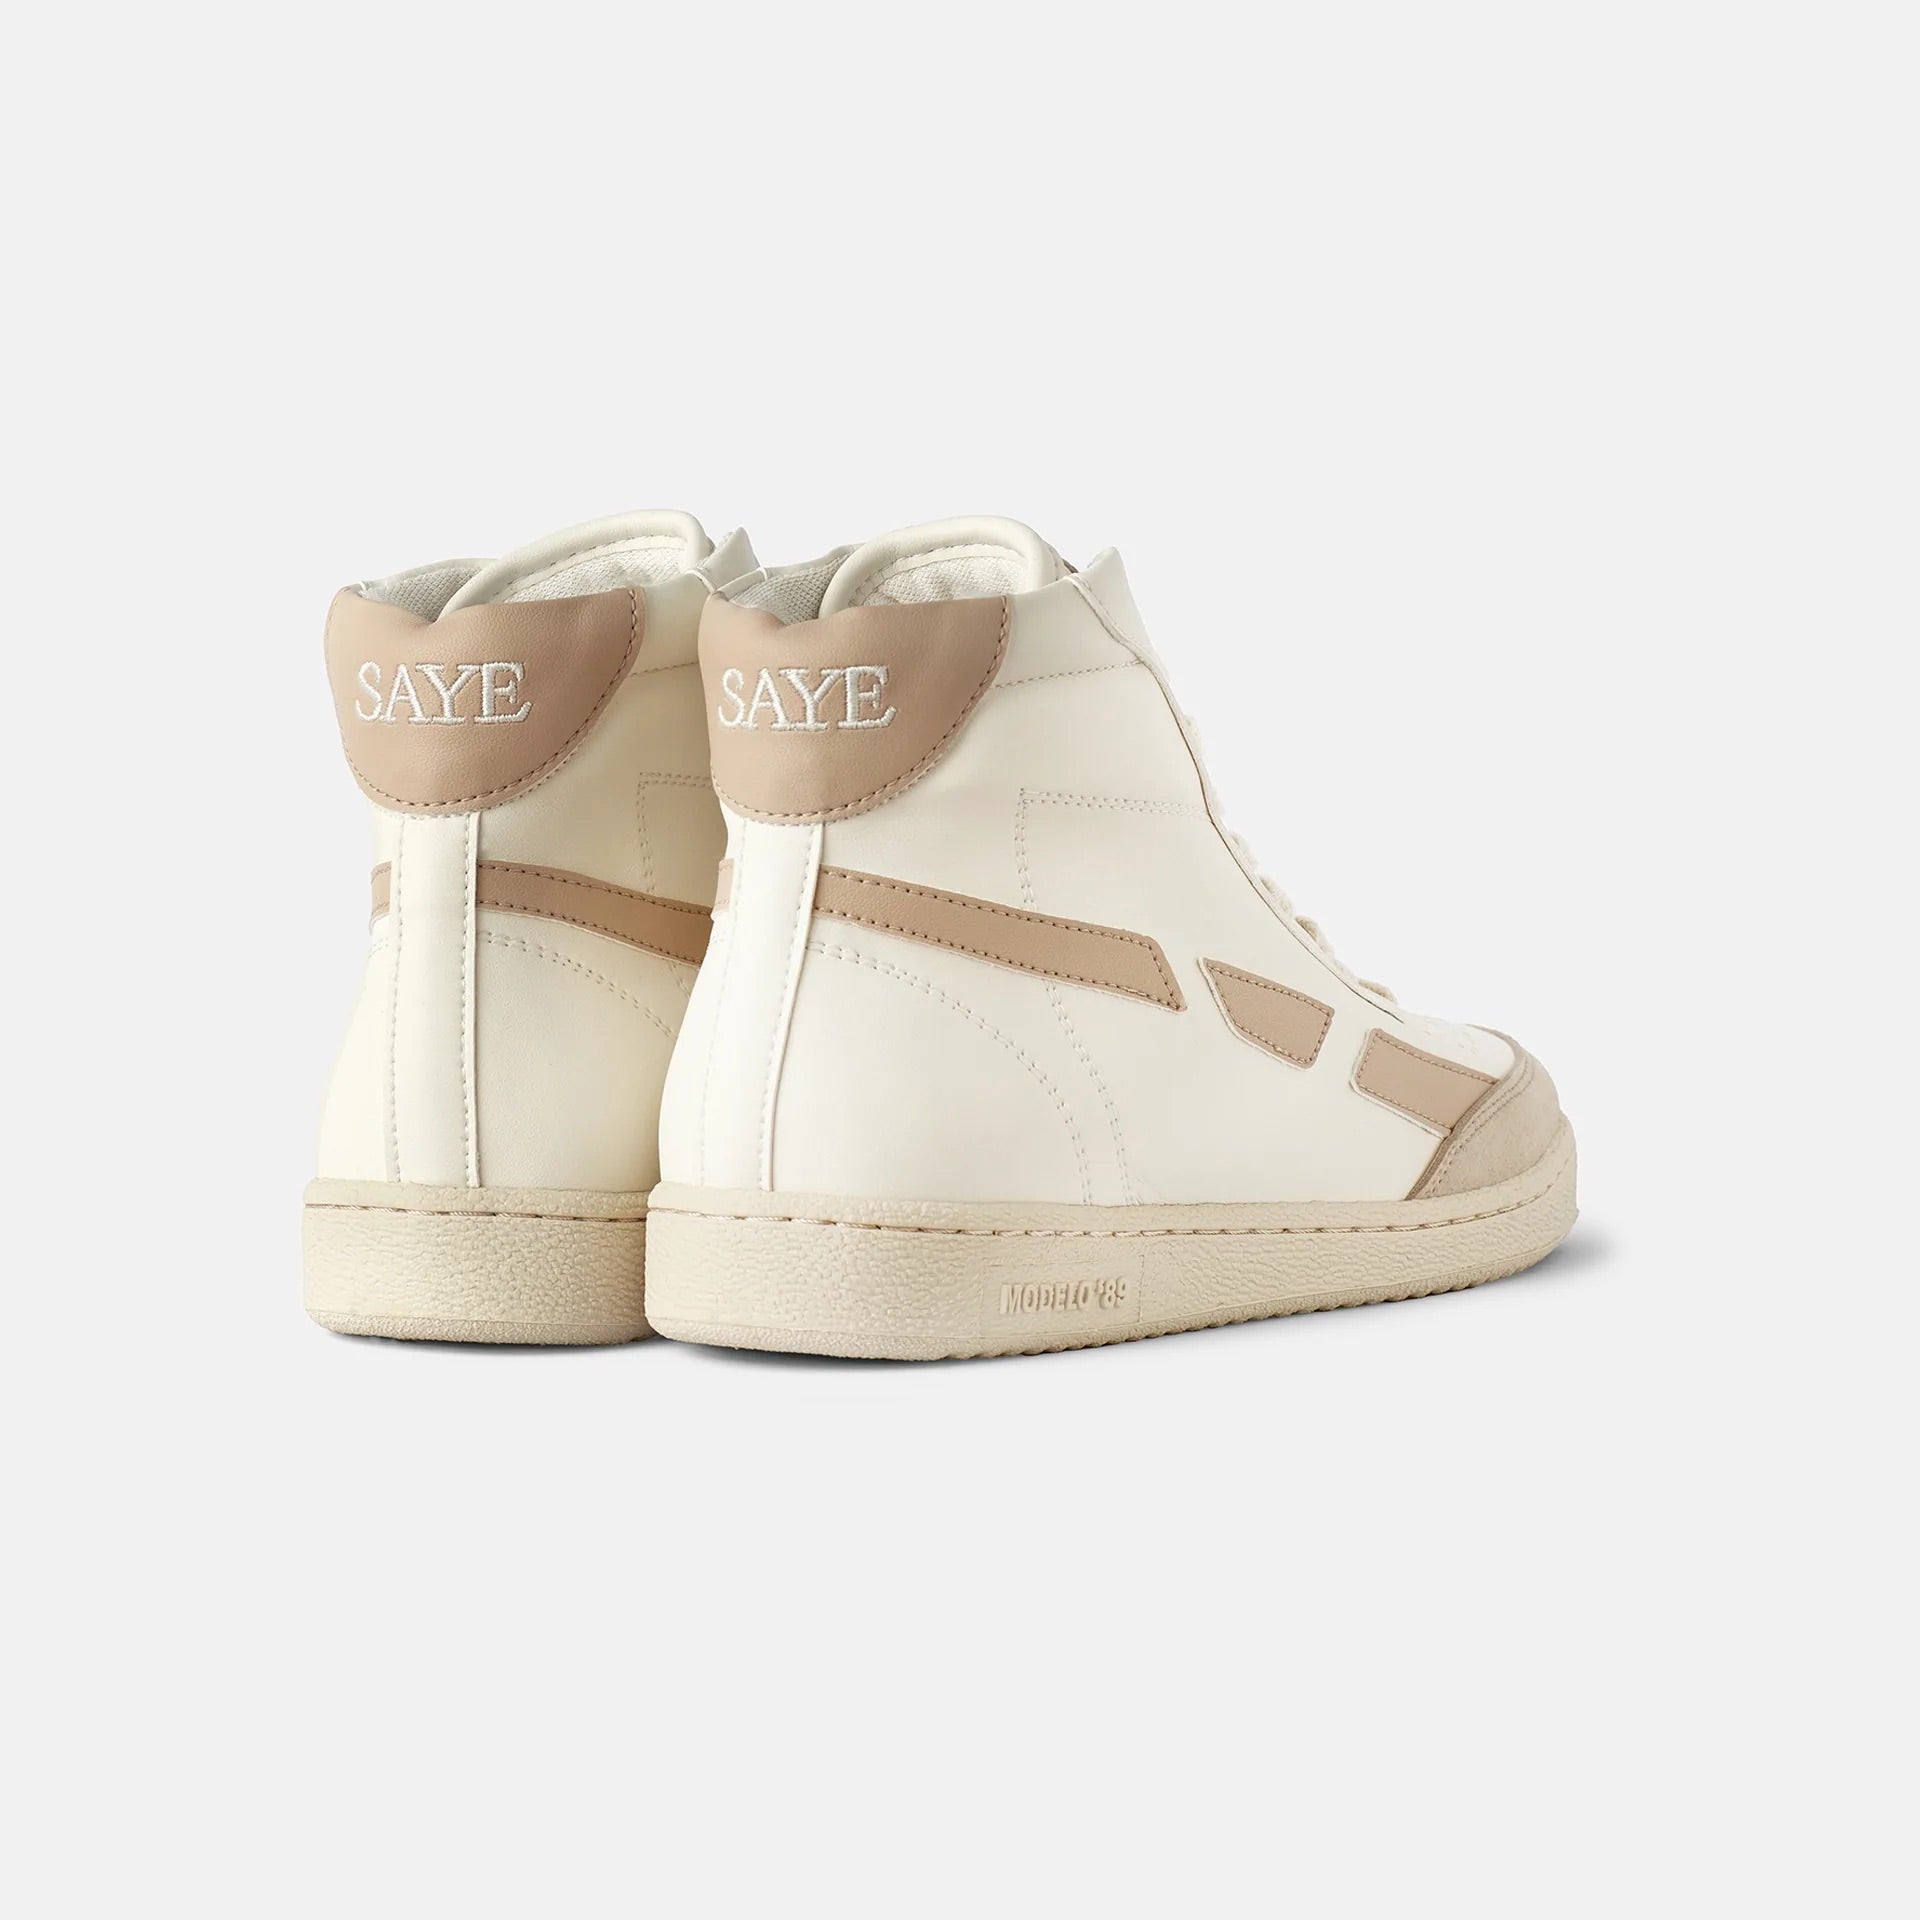 A pair of SAYE Modelo '89 Hi Sneakers - Beige with the word "save" on them.